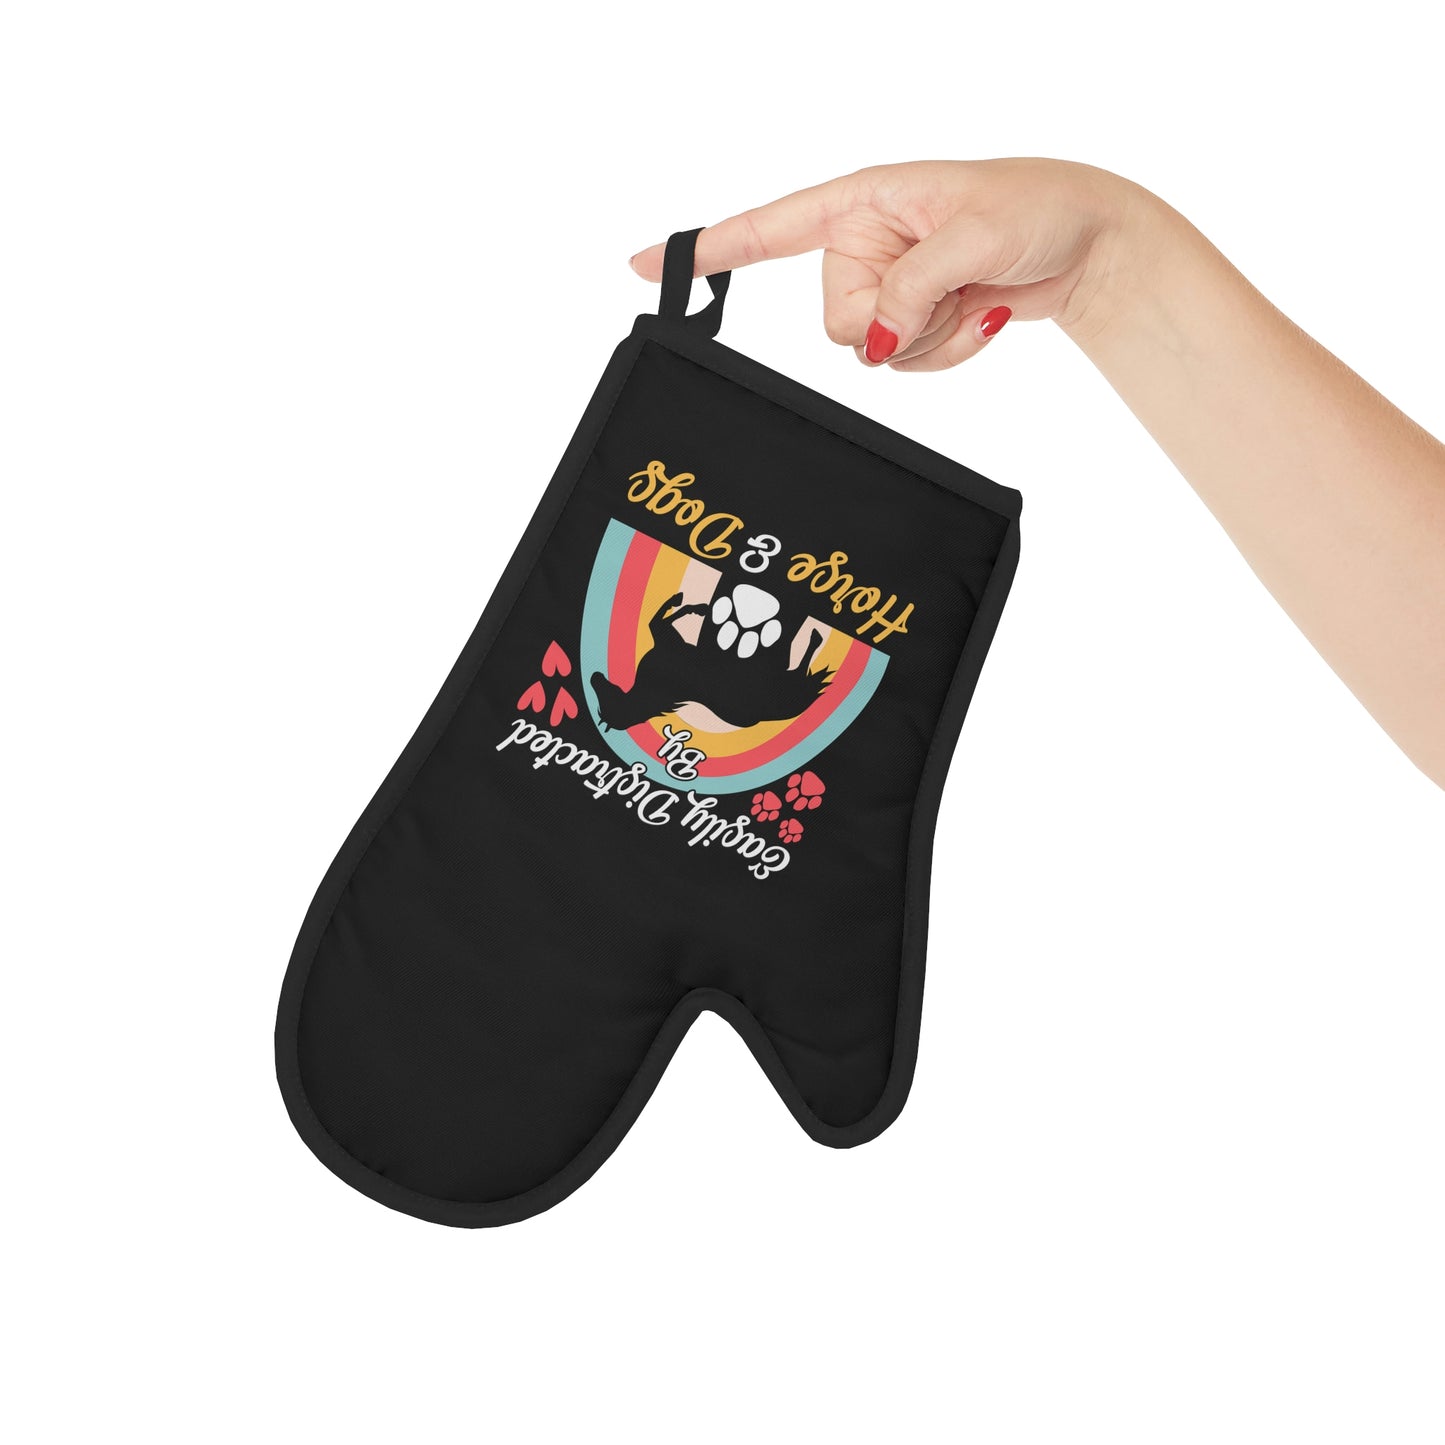 Easily Distracted by Horse & Dogs Oven Glove